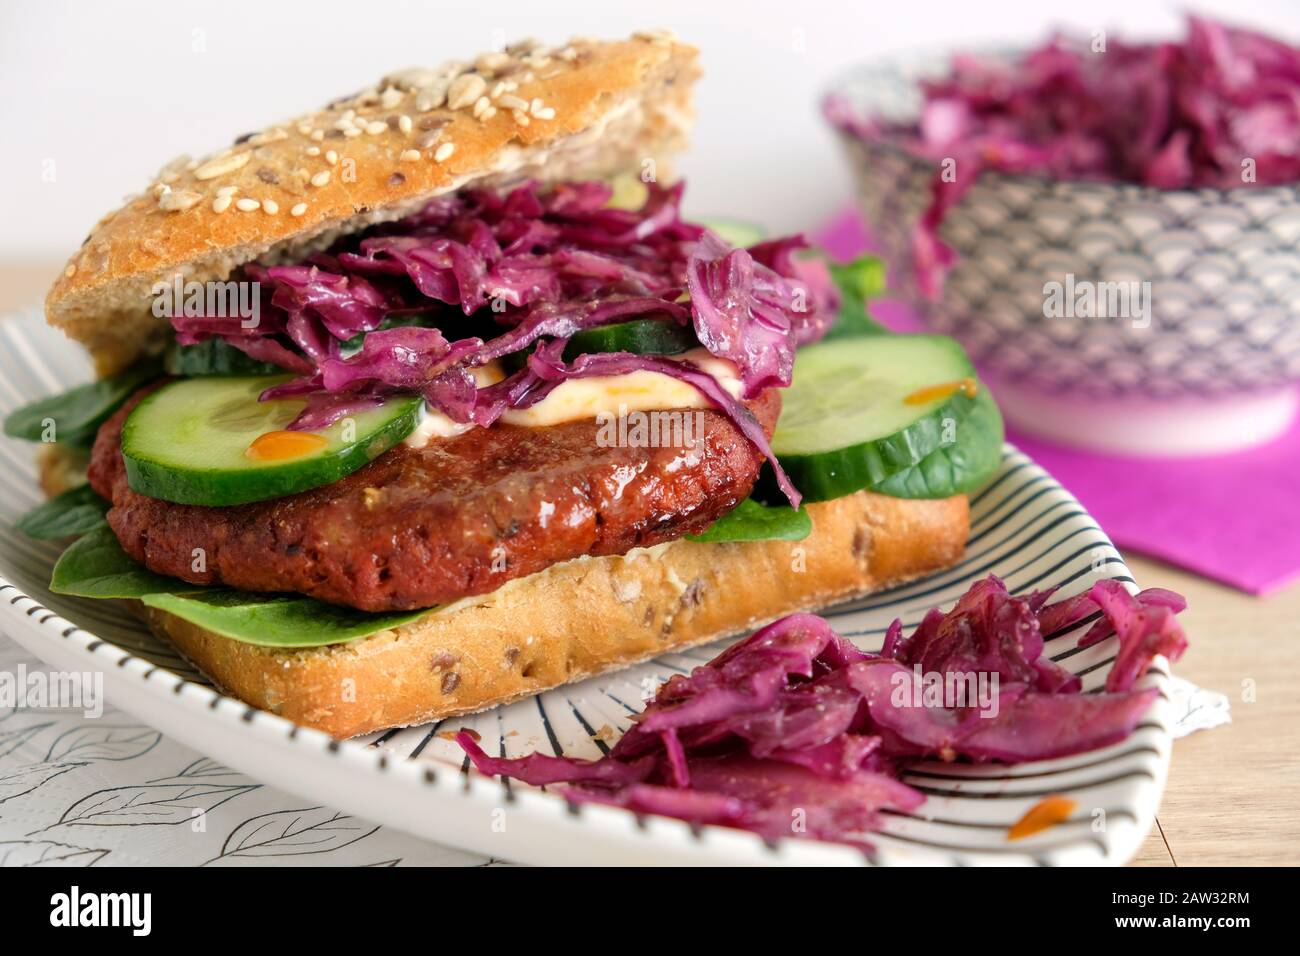 Vegan baharat burger with red cabbage salad. Burger is made with vegetable minced meat from the Danish brand Naturli. Stock Photo